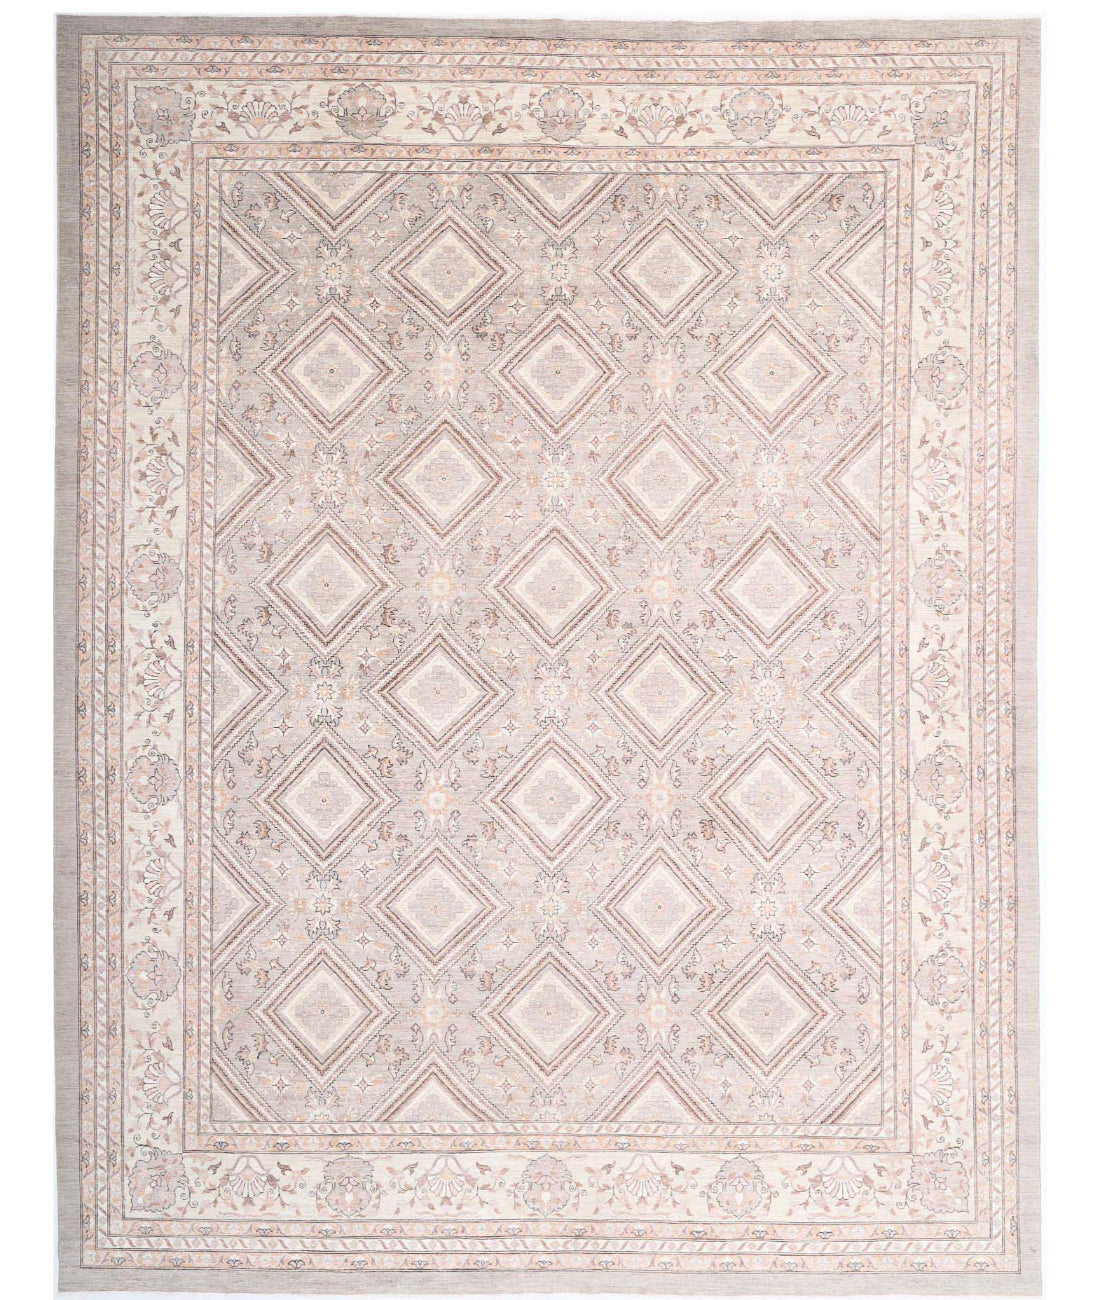 Hand Knotted Fine Serenity Wool Rug - 13'4'' x 17'6'' 13'4'' x 17'6'' (400 X 525) / Grey / Ivory